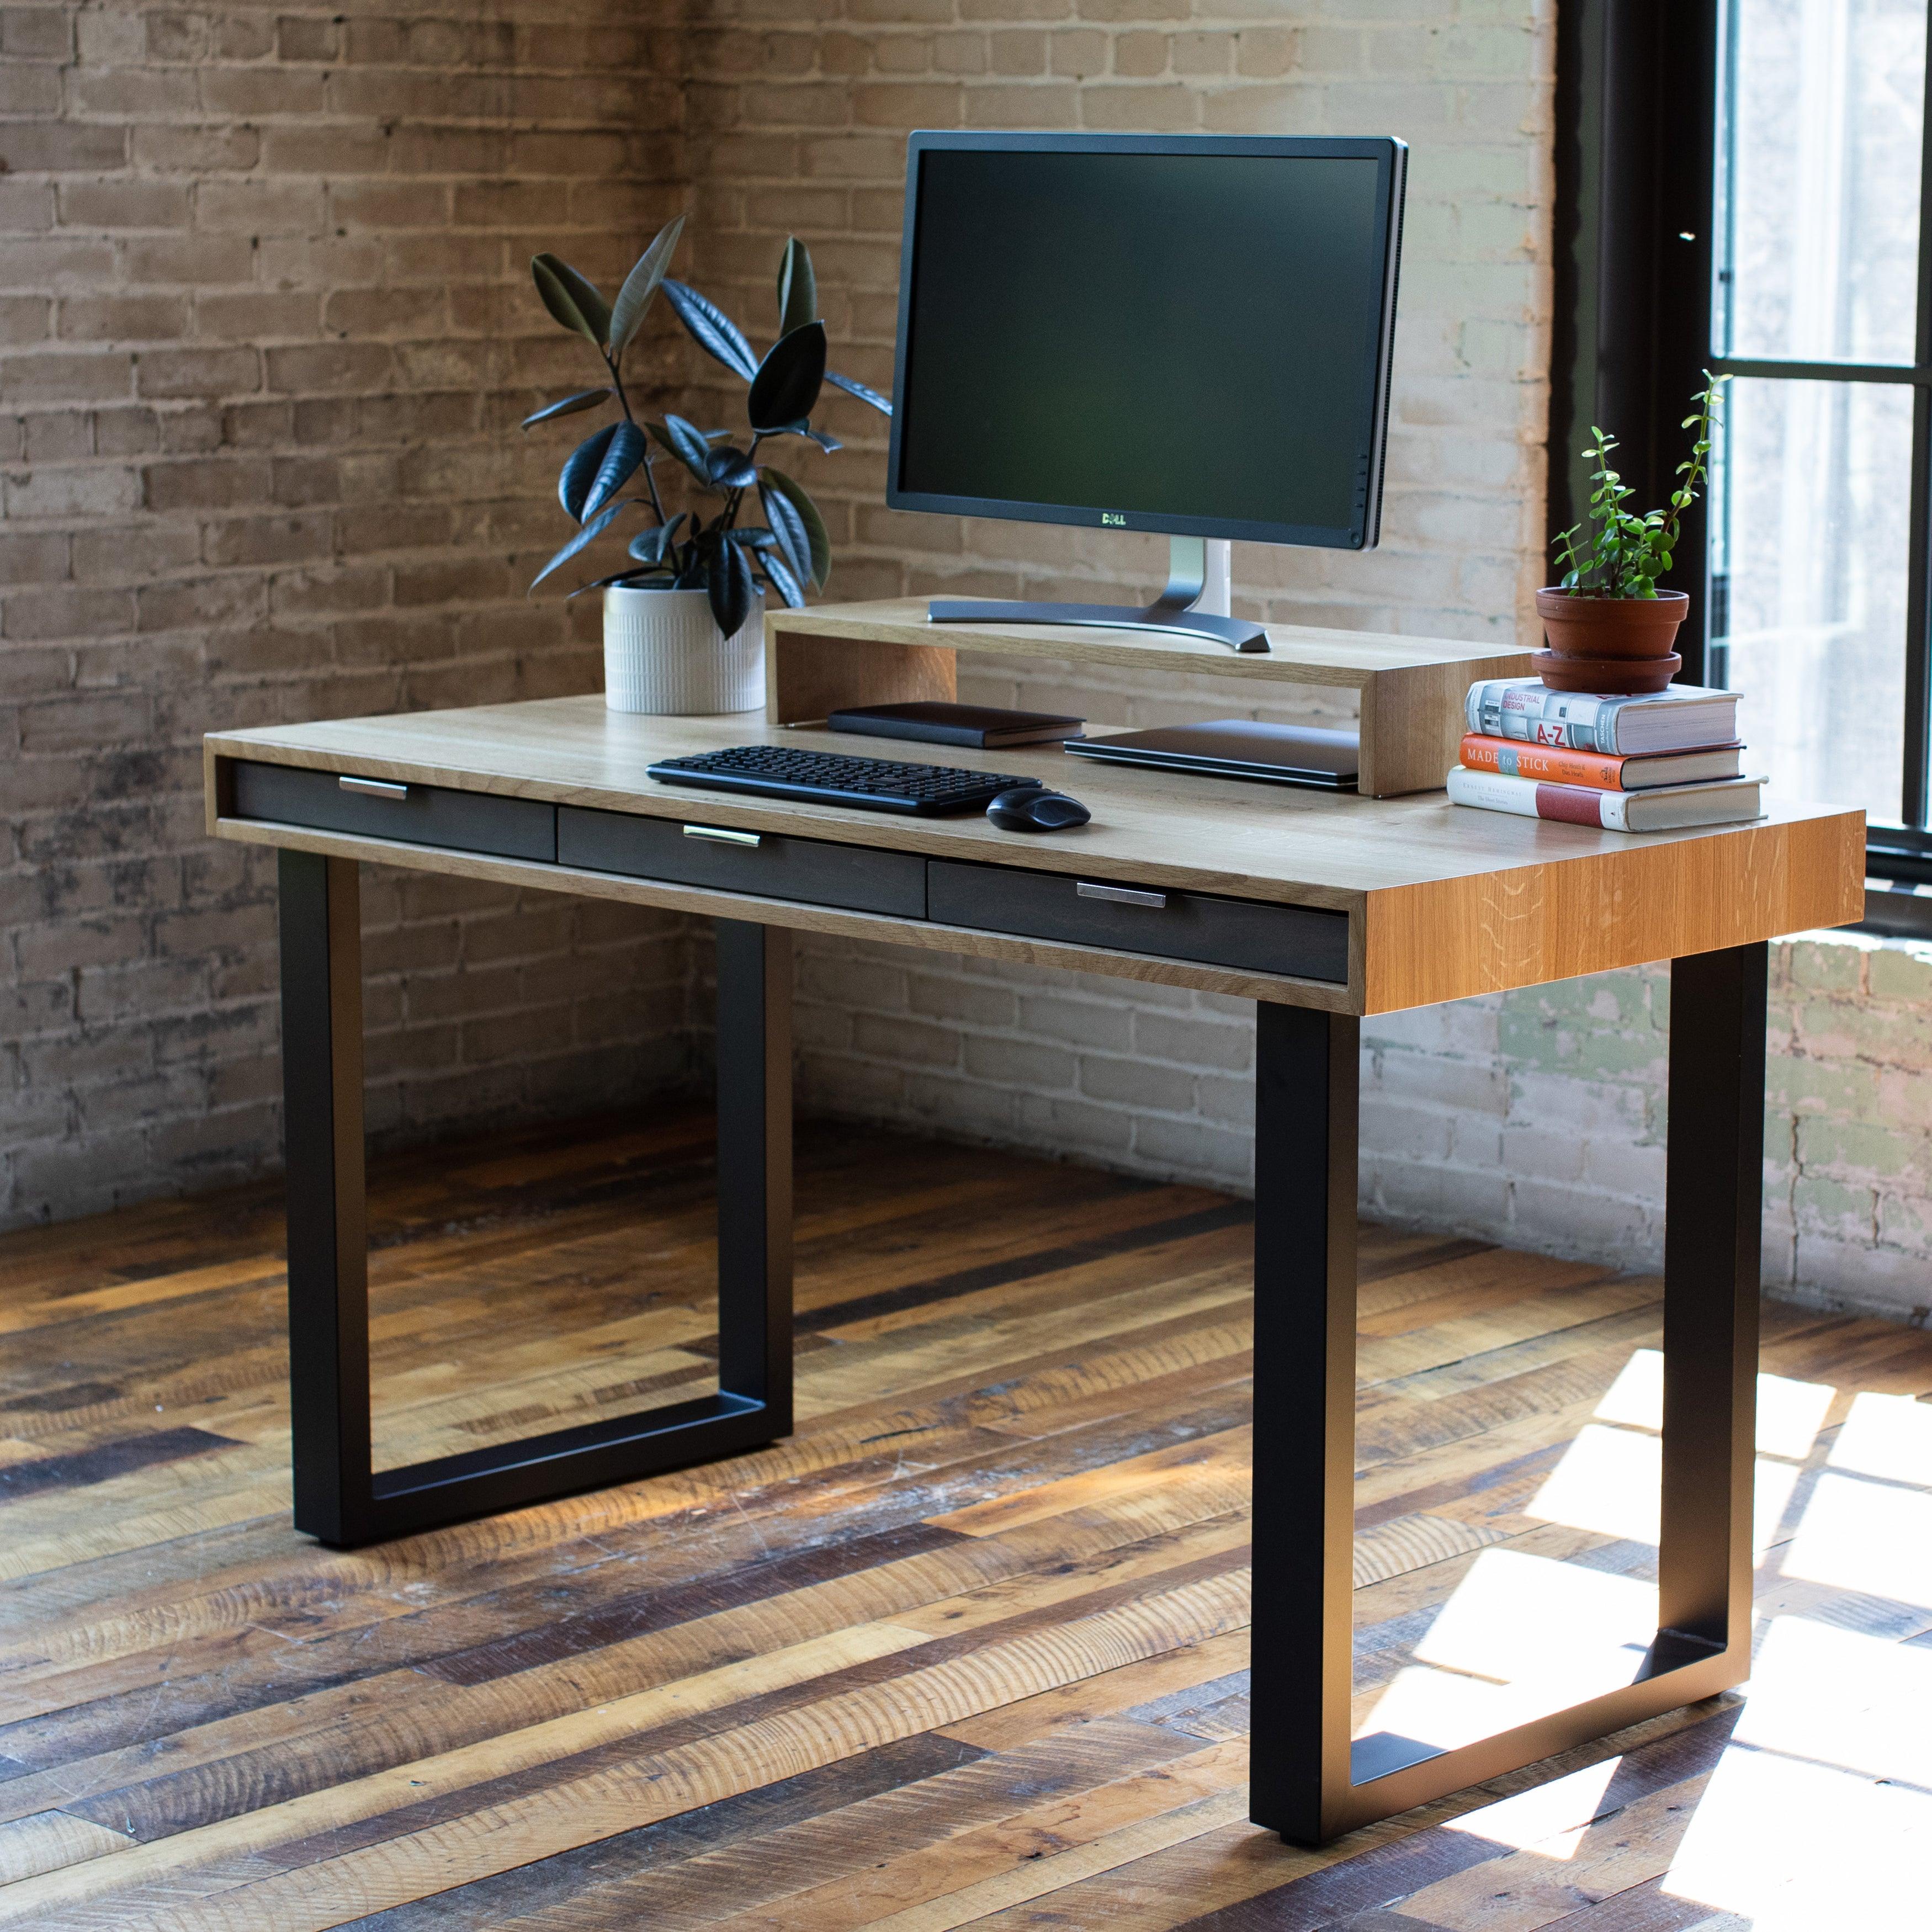 SLIM // Classic Modern Solid Wood Desk with Drawers // Fixed Height or Adjustable Height Desk Base Options - ROMI DESIGN